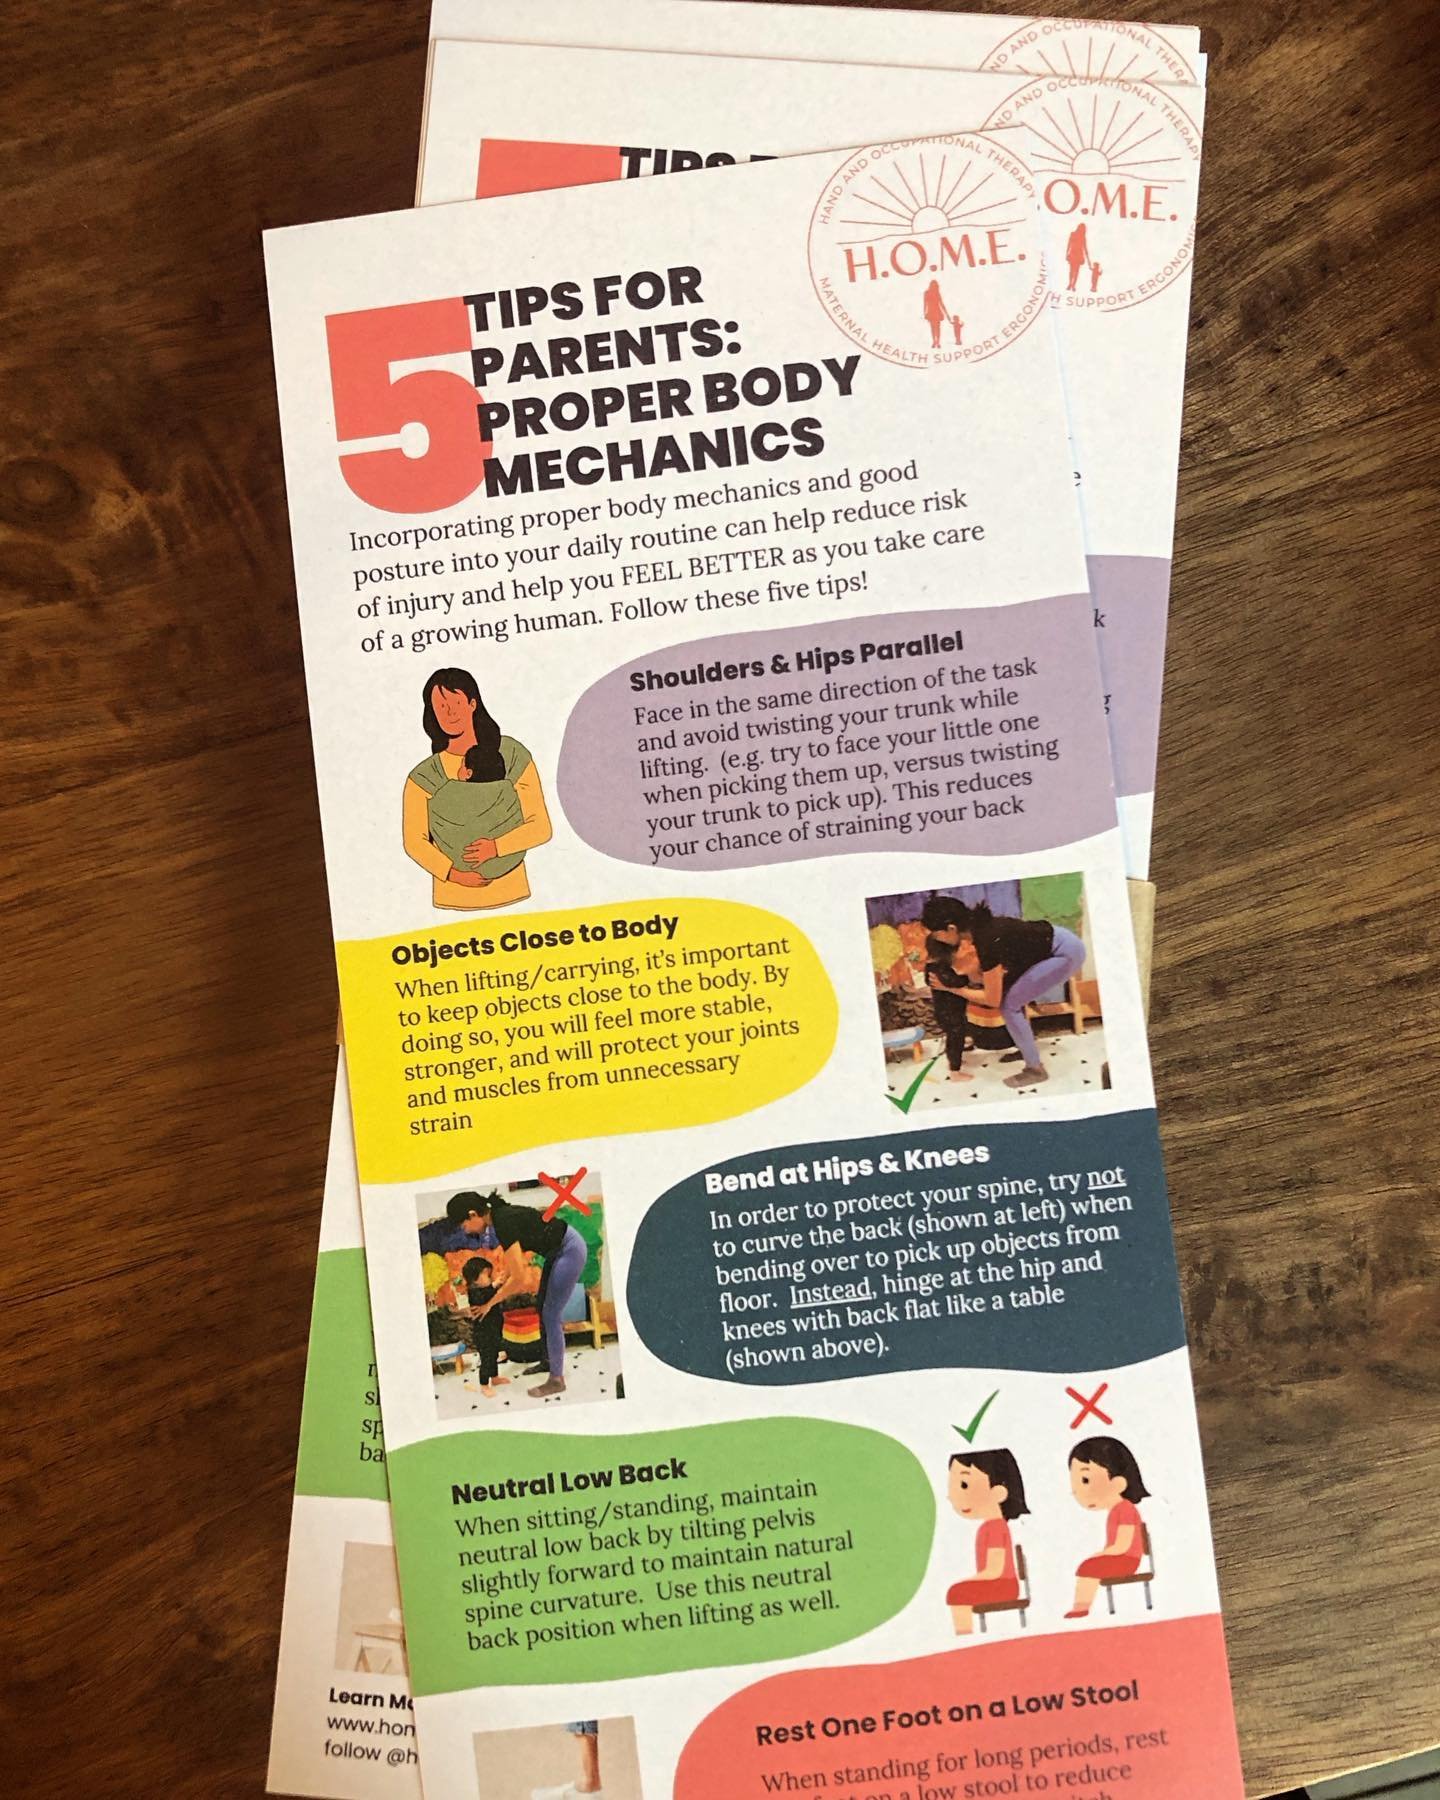 Hot off the press!  Infographic flyers with 5 tips for parents on using proper body mechanics ! 

Will be dropping them off at various local businesses ❤️ 

If you&rsquo;re a parent, birth worker, healthcare provider and would like a digital copy to 